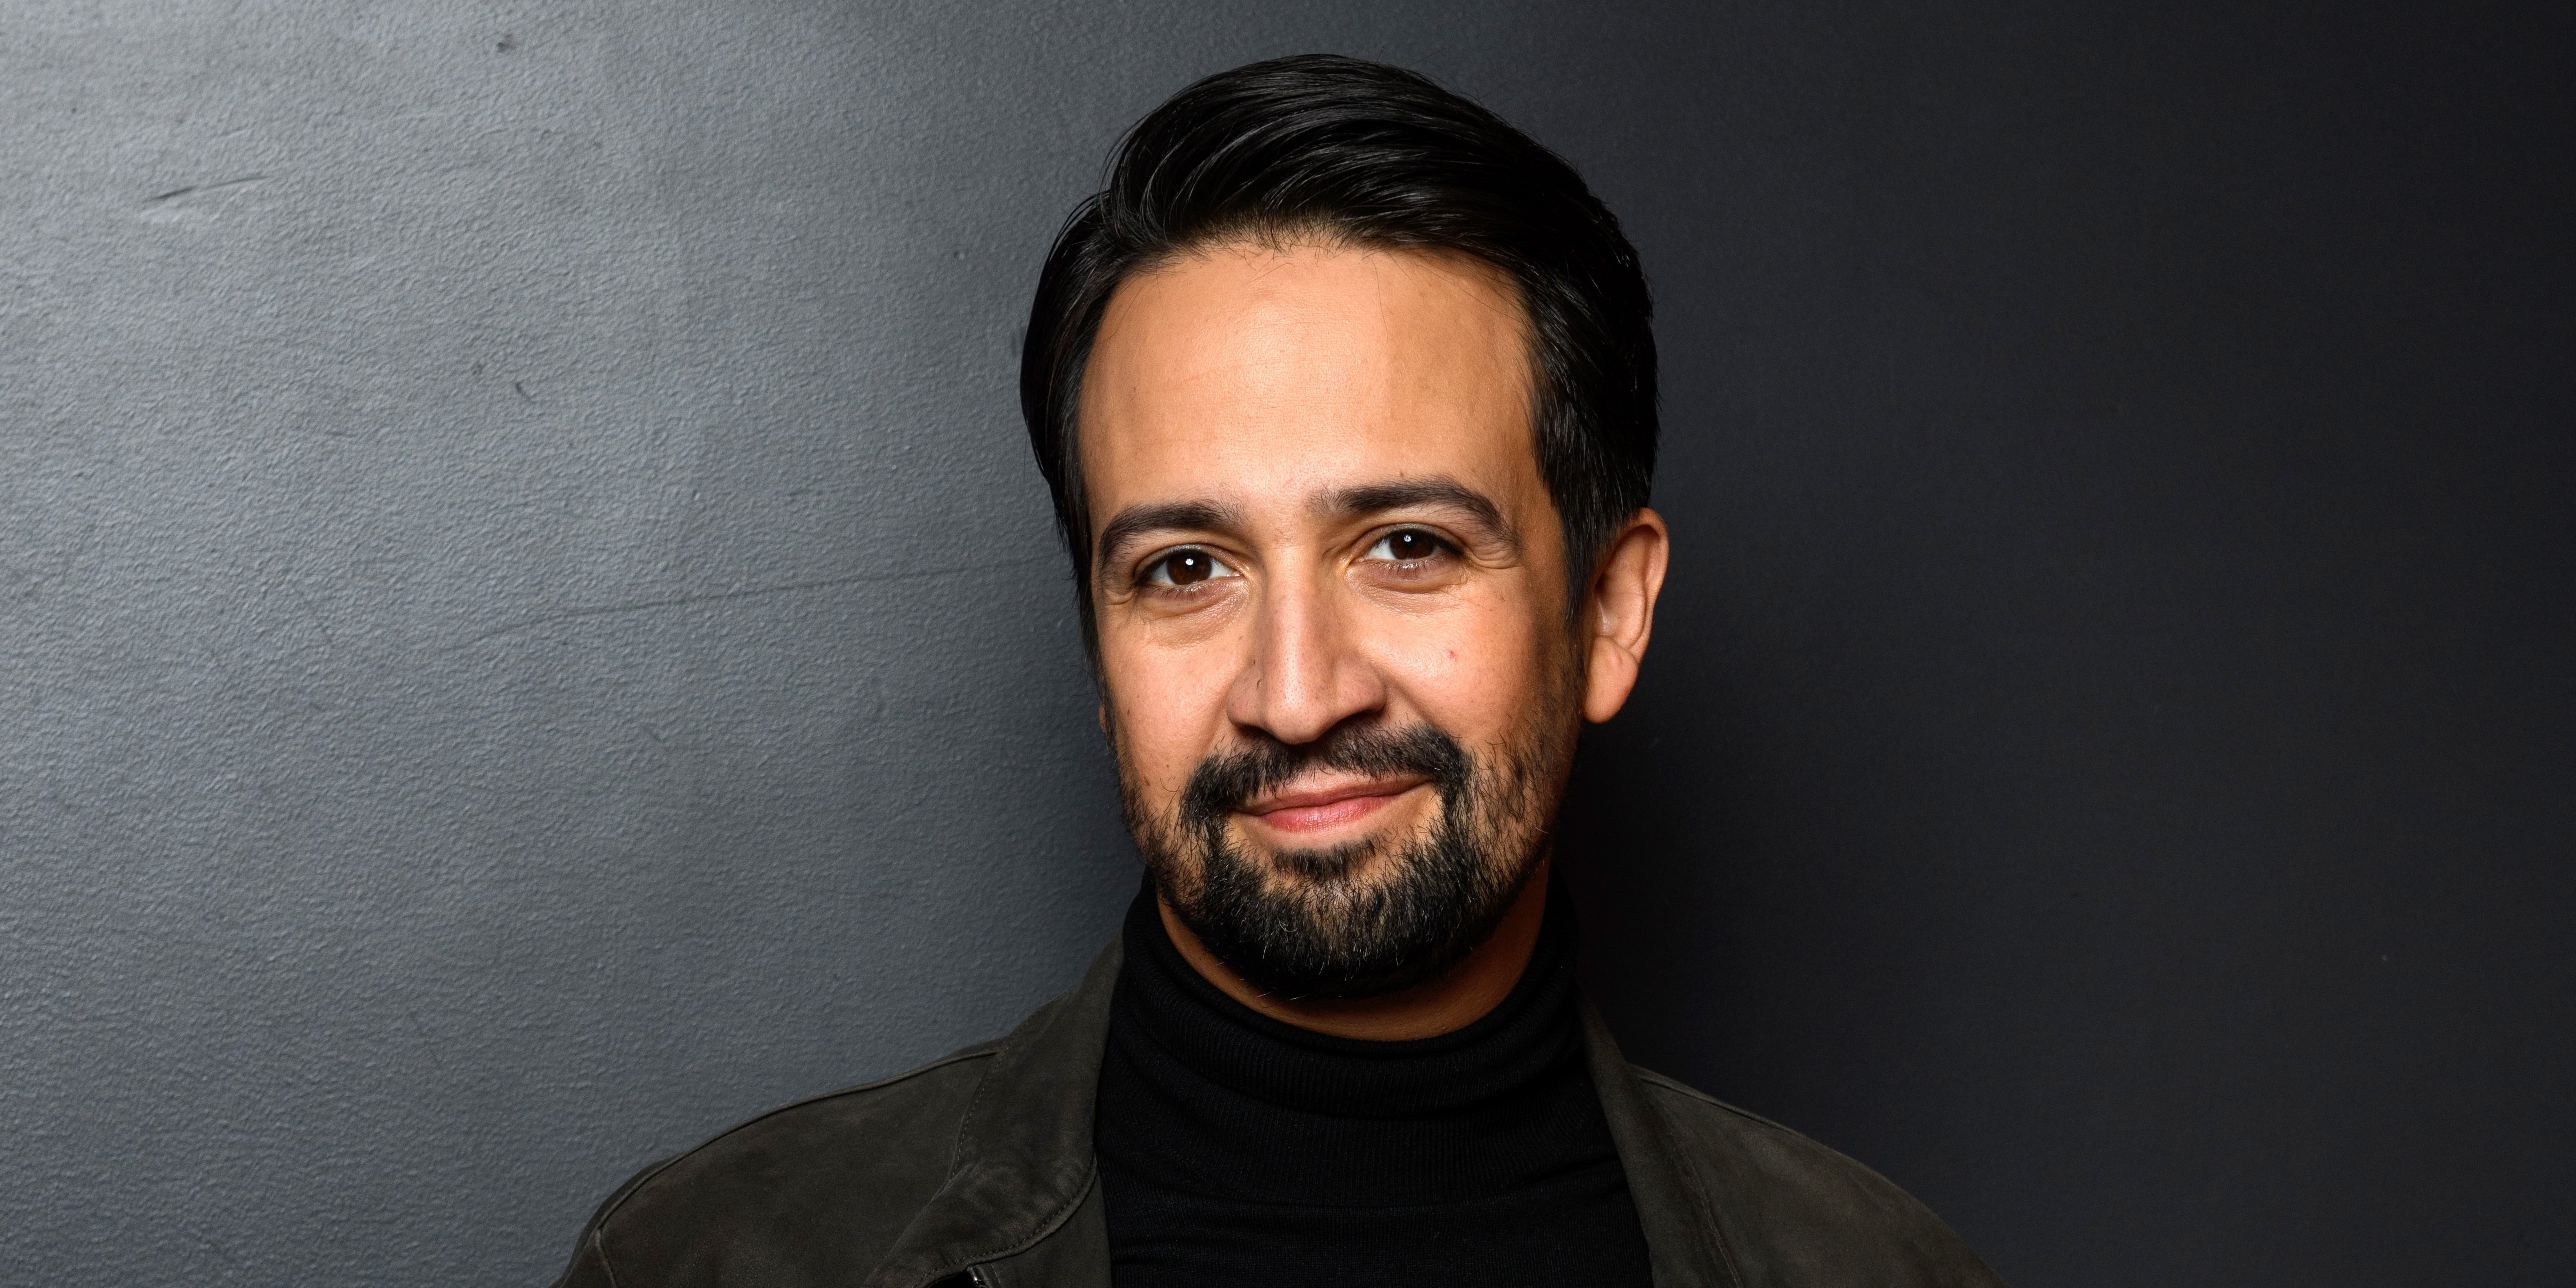 Lin-Manuel Miranda could become third youngest EGOT winner ever - GoldDerby